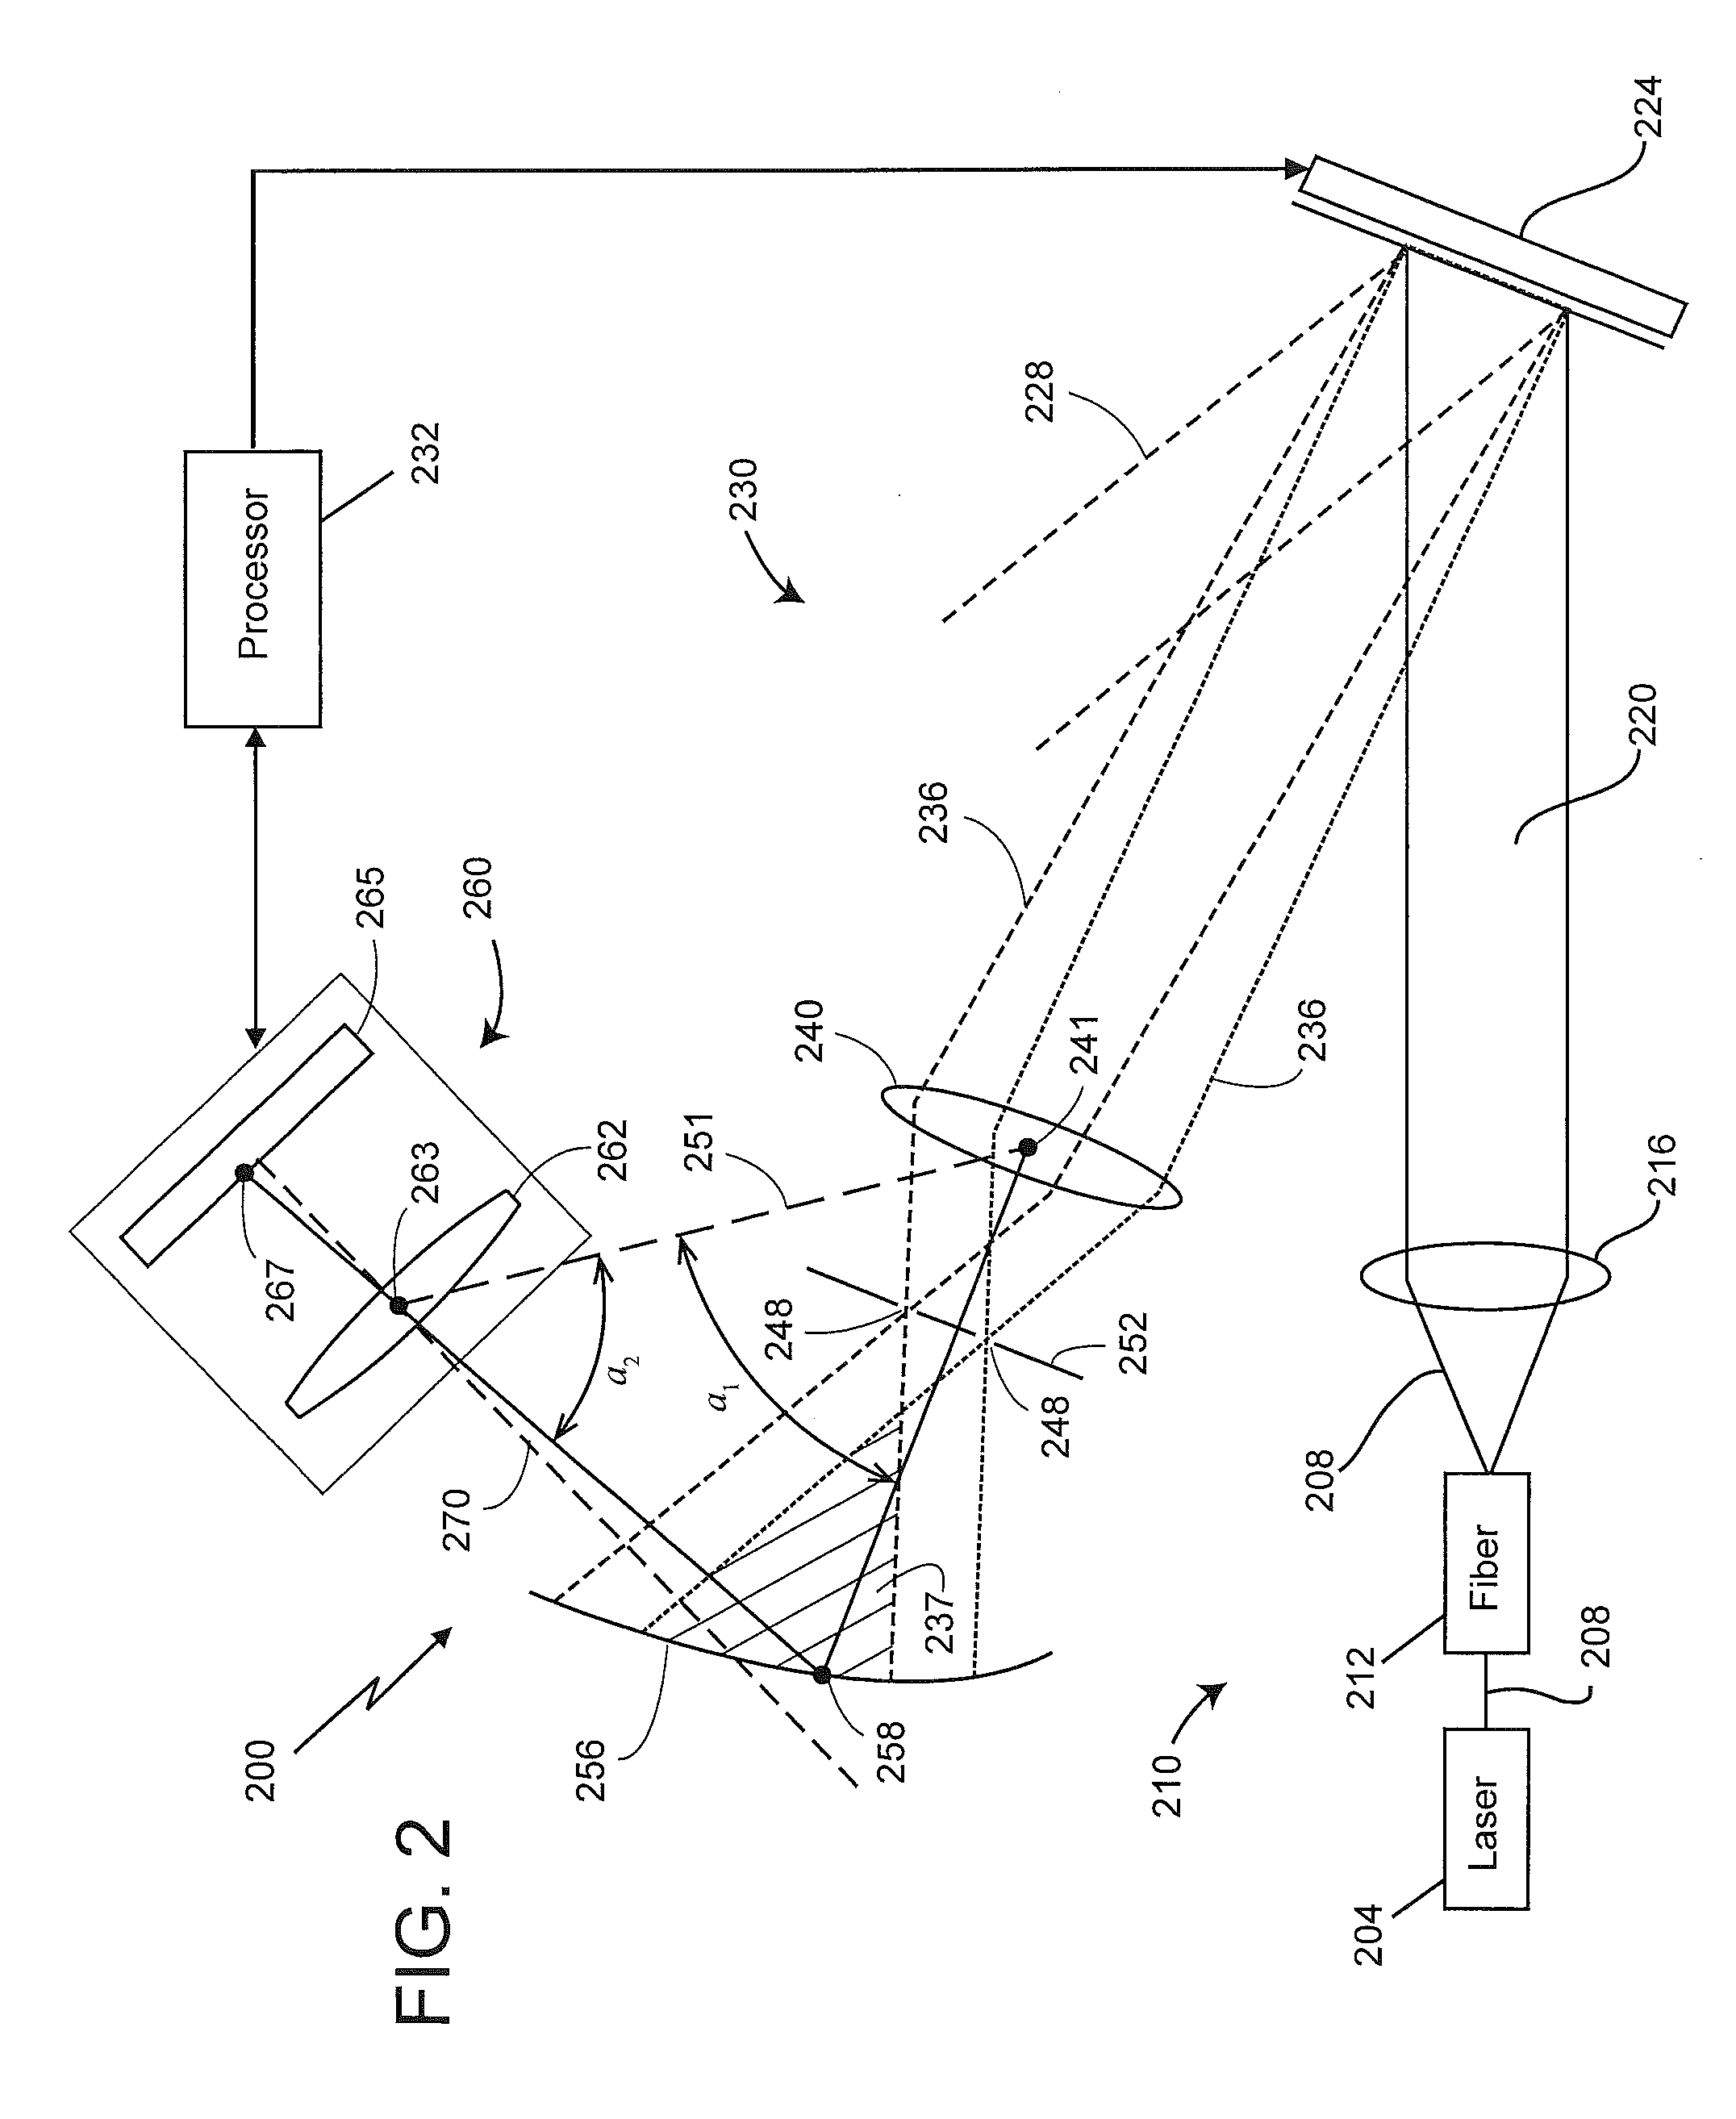 Device and method using a spatial light modulator to find 3D coordinates of an object